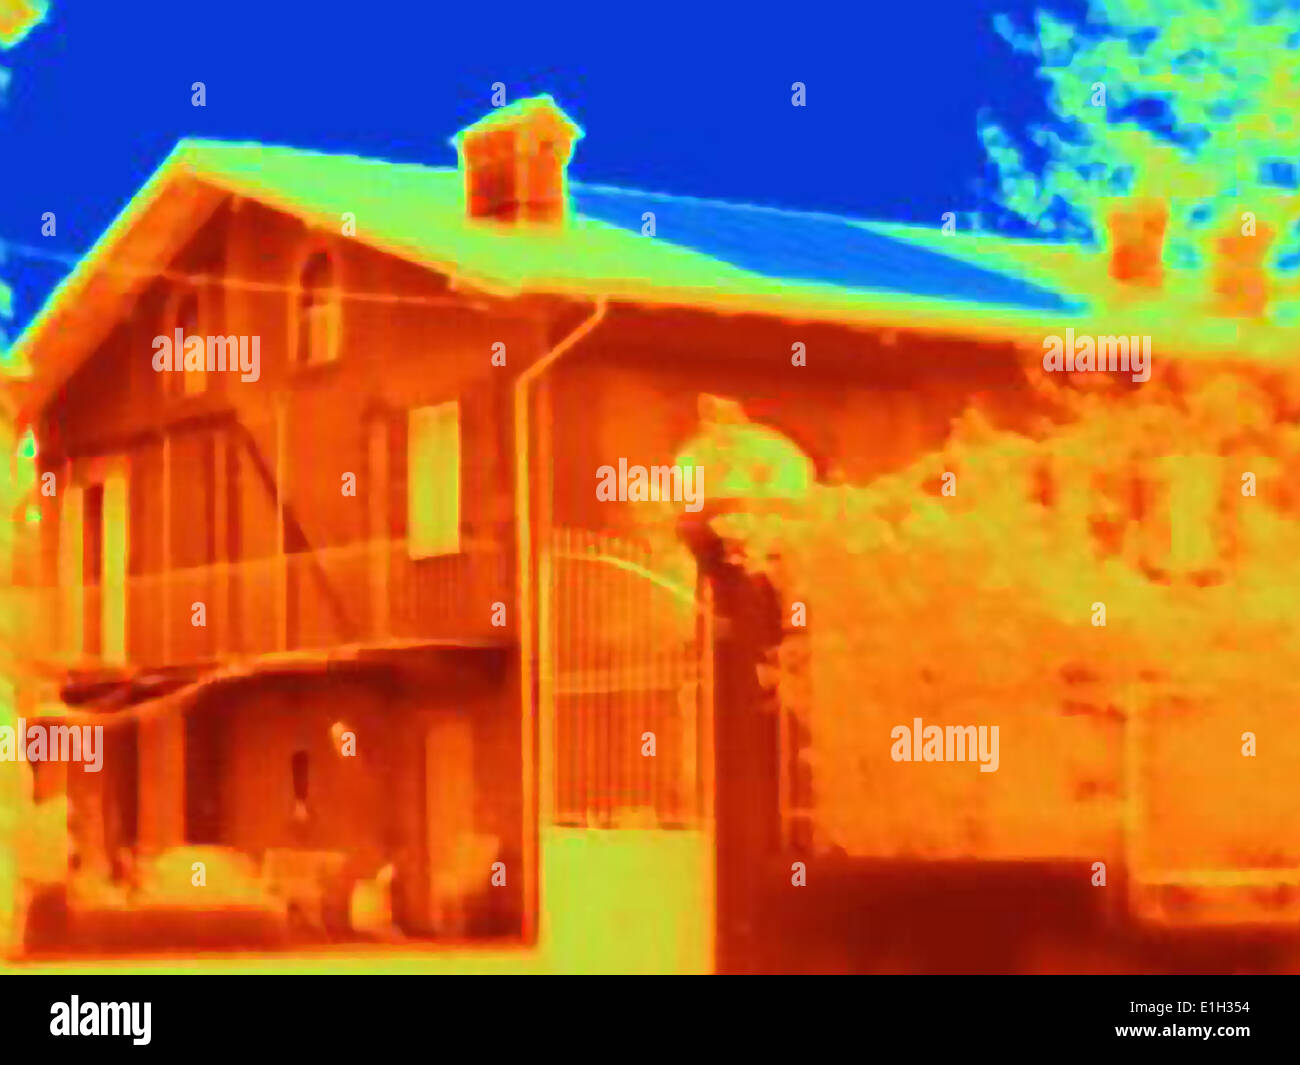 https://c8.alamy.com/comp/E1H354/thermal-image-of-a-house-with-solar-cells-on-the-roof-absorbing-the-E1H354.jpg